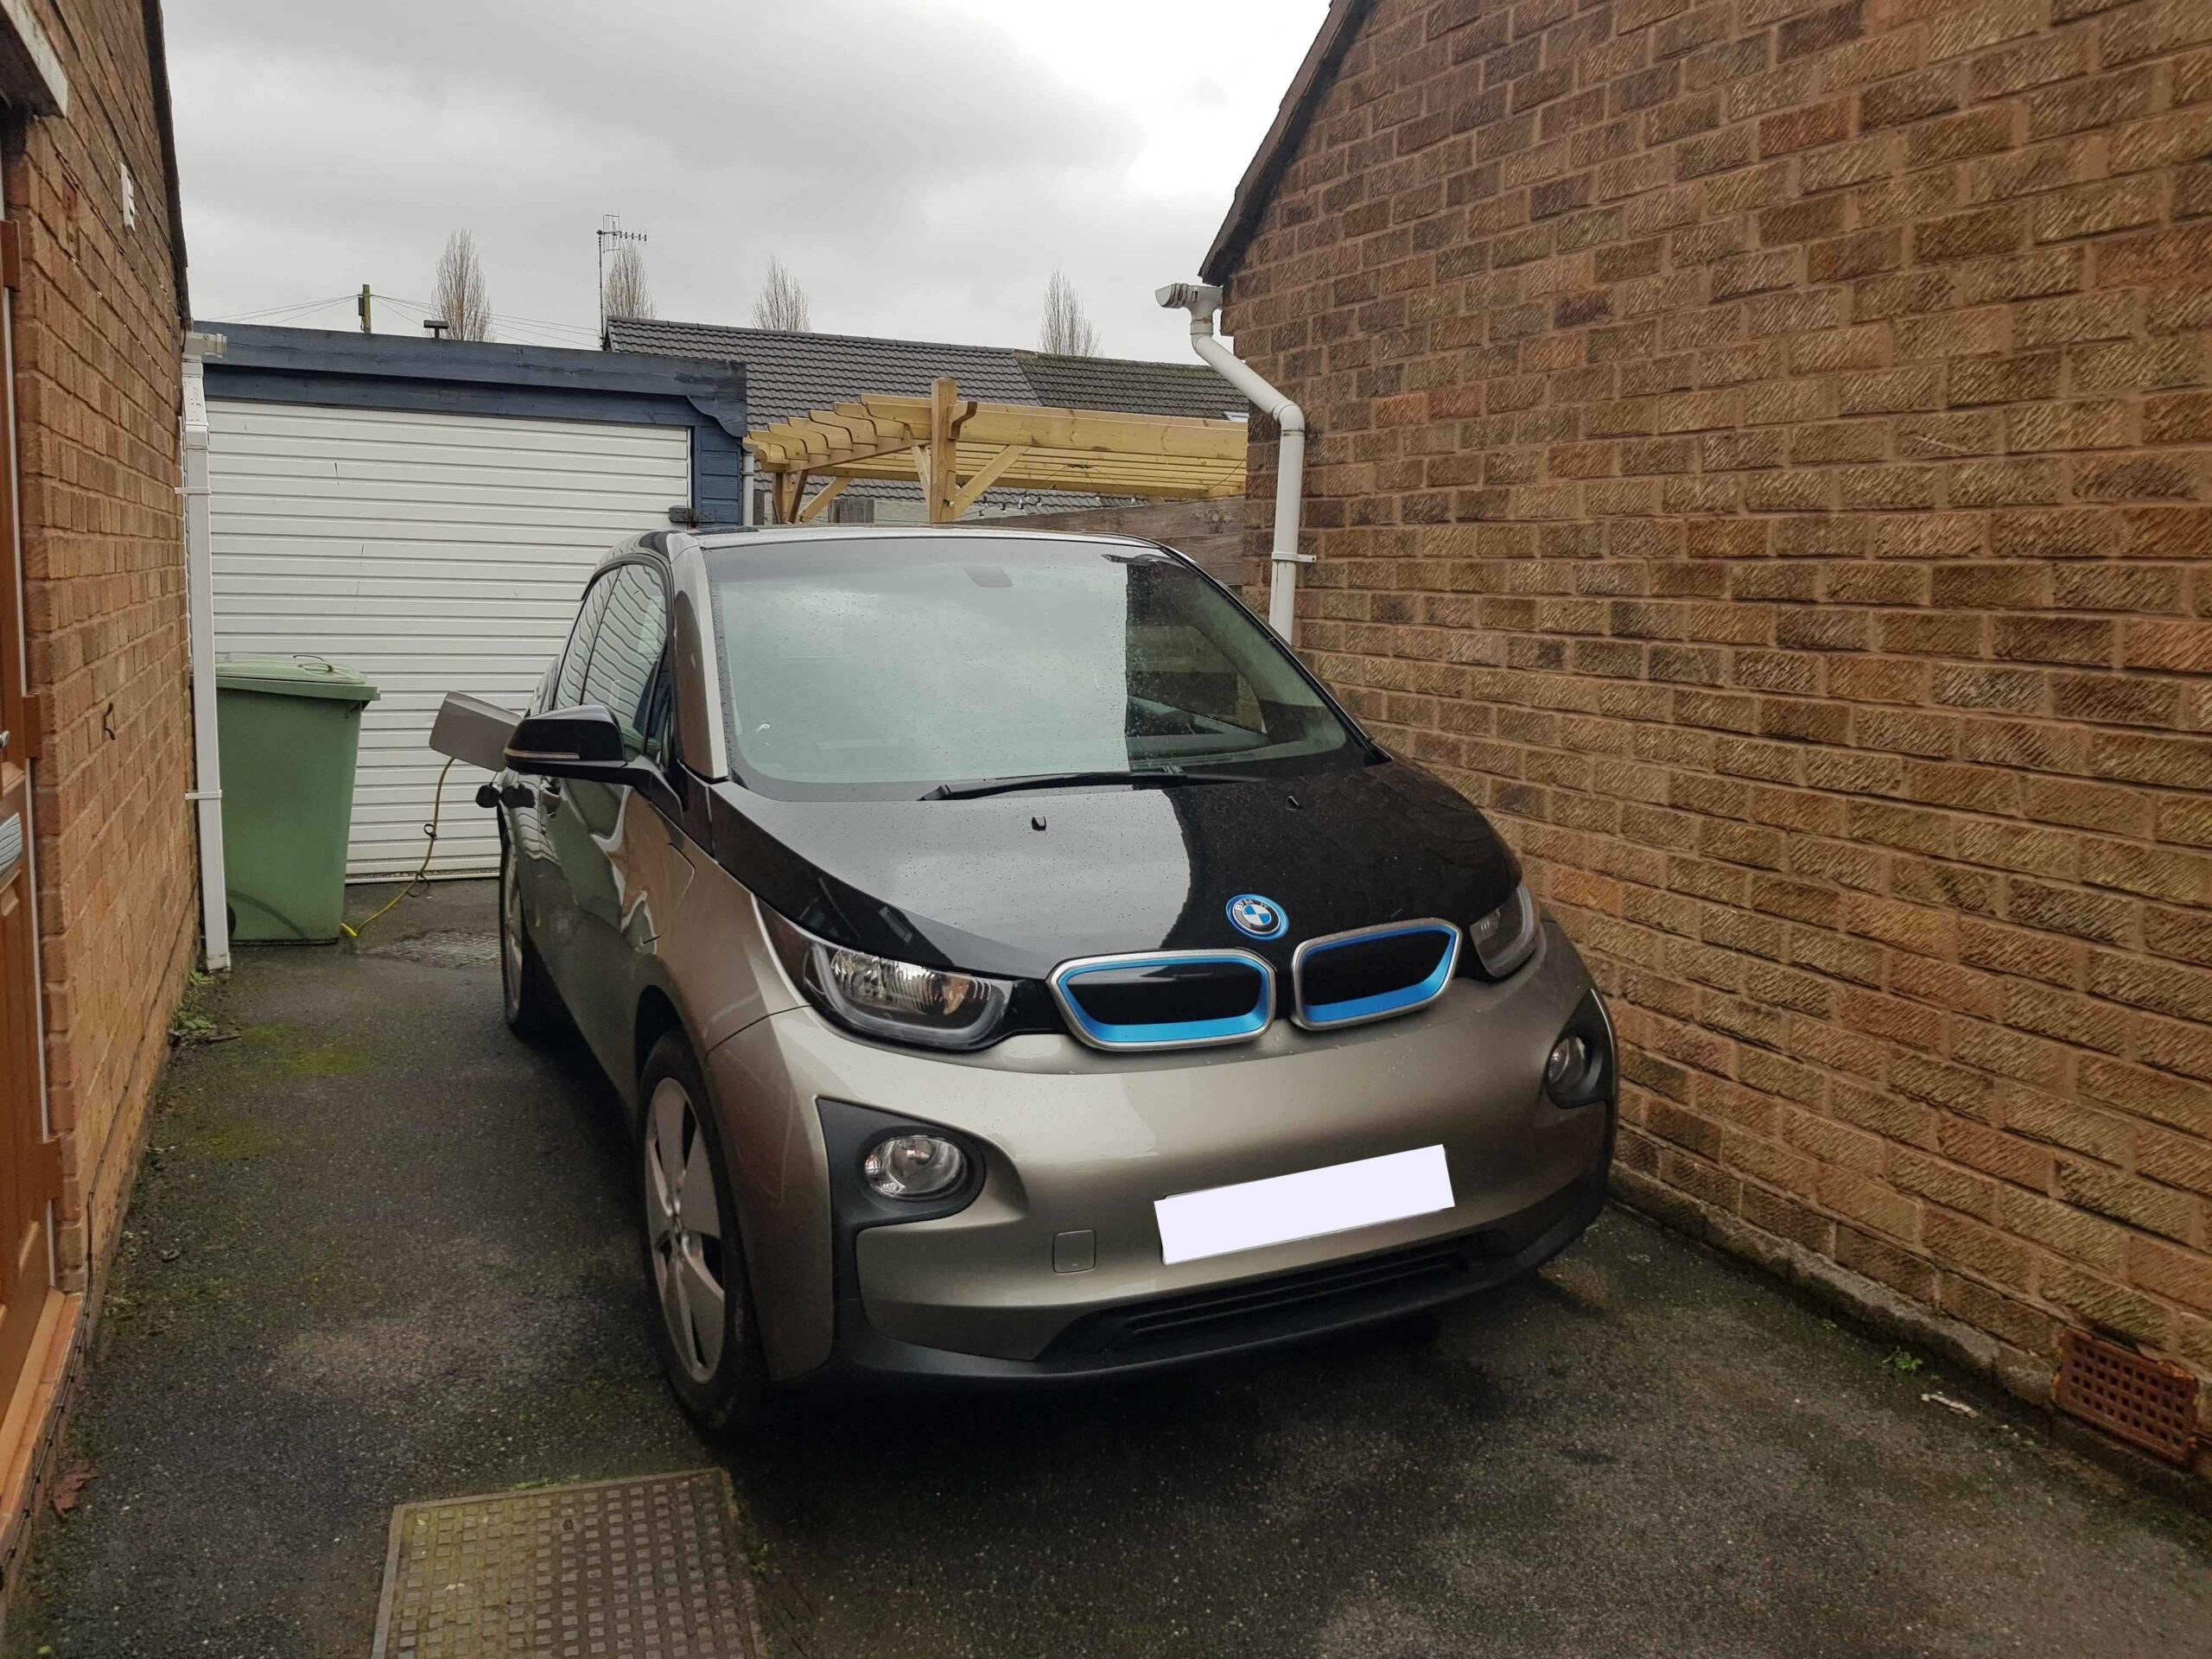 Public charging review: BMW i3 REx 2017, Peterboat